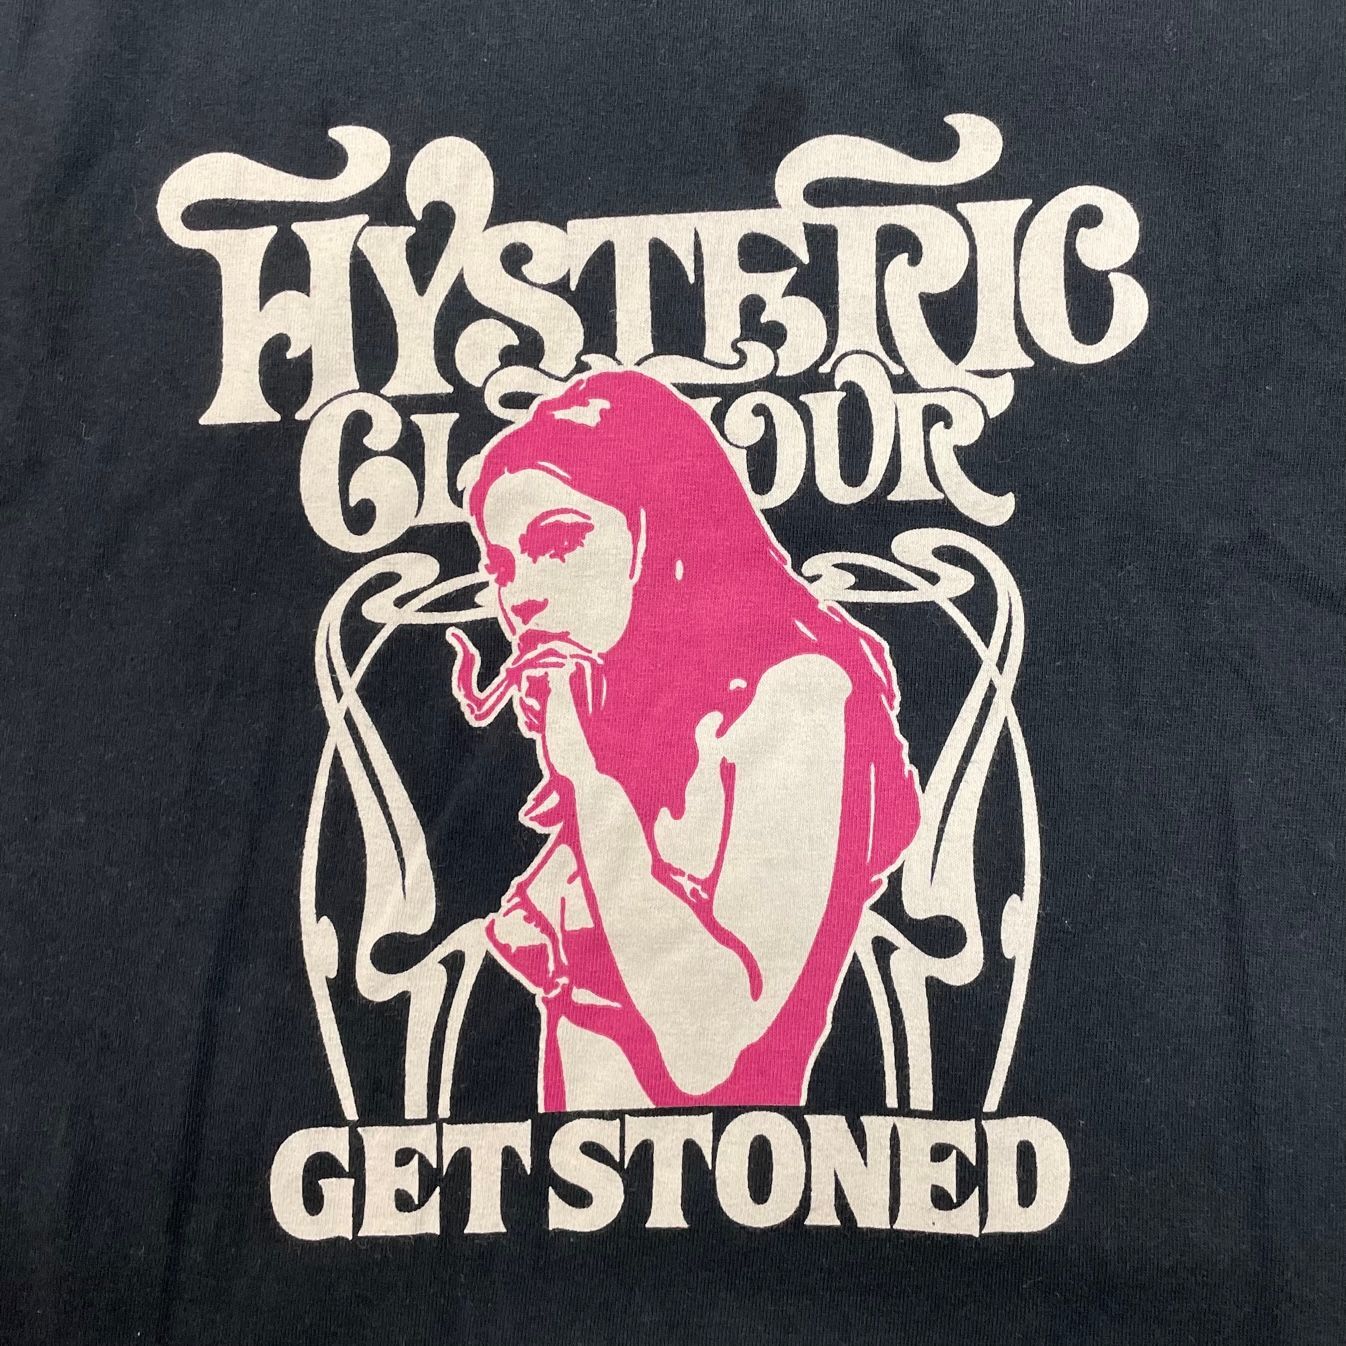 HYSTERIC GLAMOUR 23SS GET STONED Tシャツ ガールプリント Tシャツ